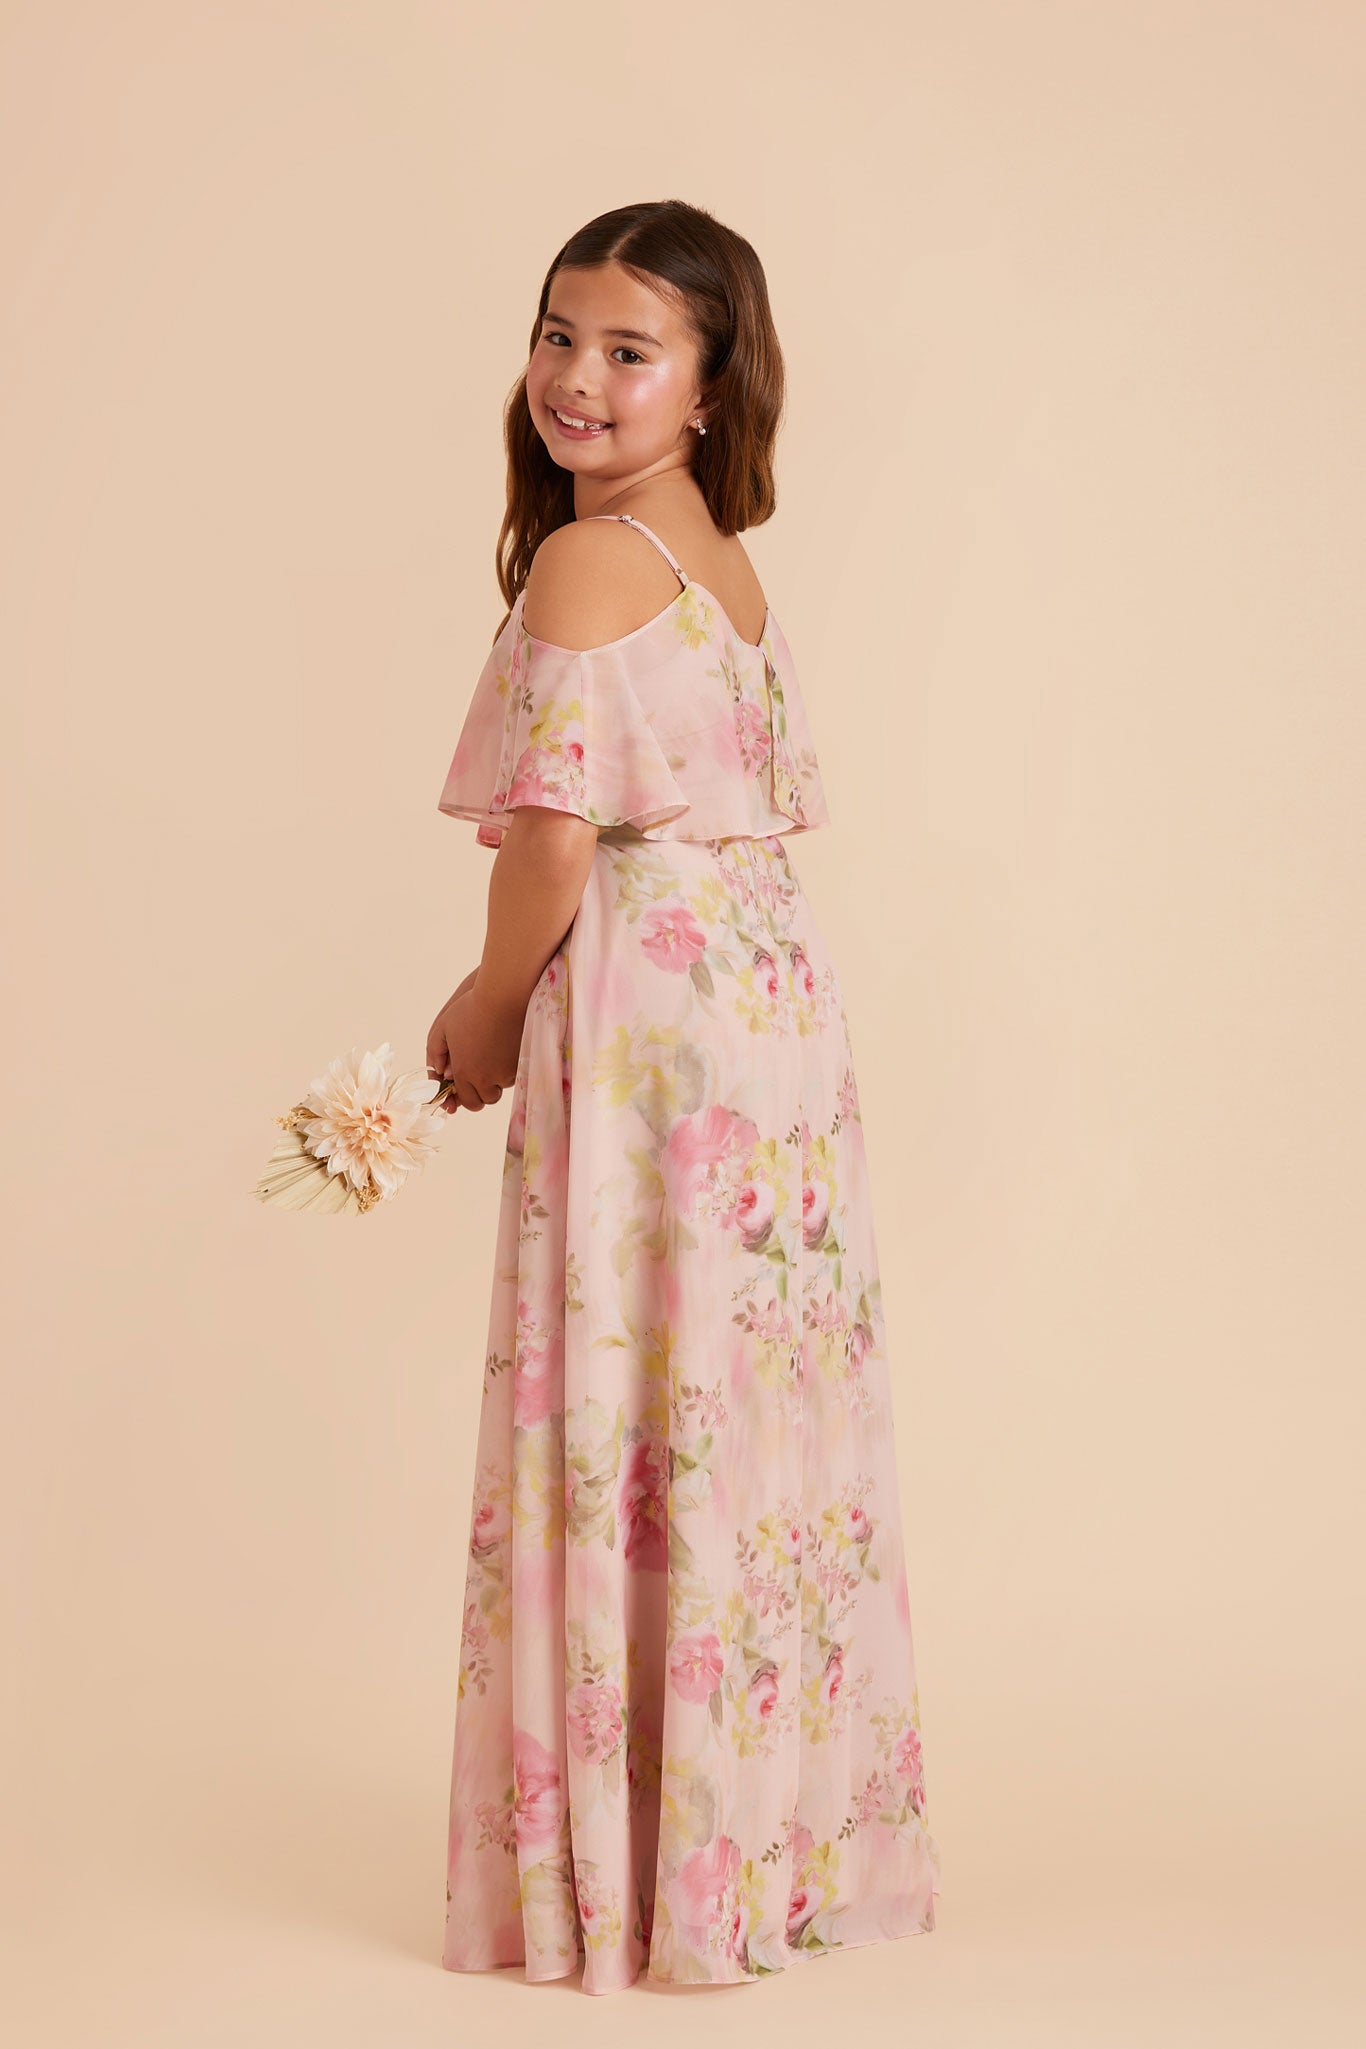 Vintage Pink Floral Janie Convertible Junior Dress by Birdy Grey